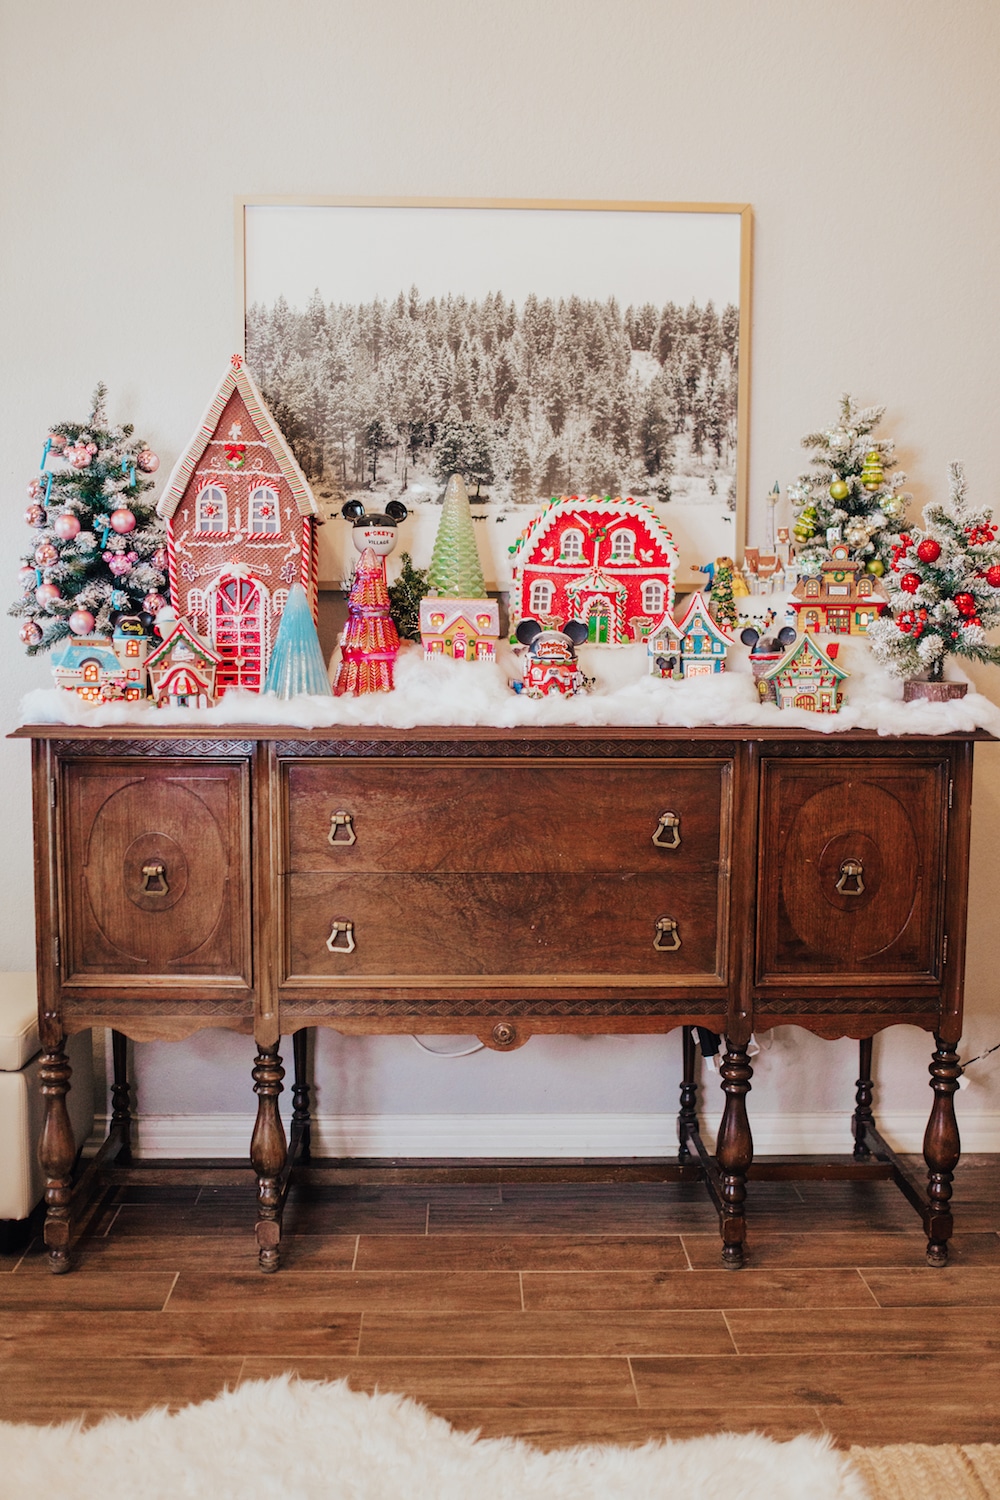 How to Create The Perfect Christmas Vilage Display - 7 Simple Steps